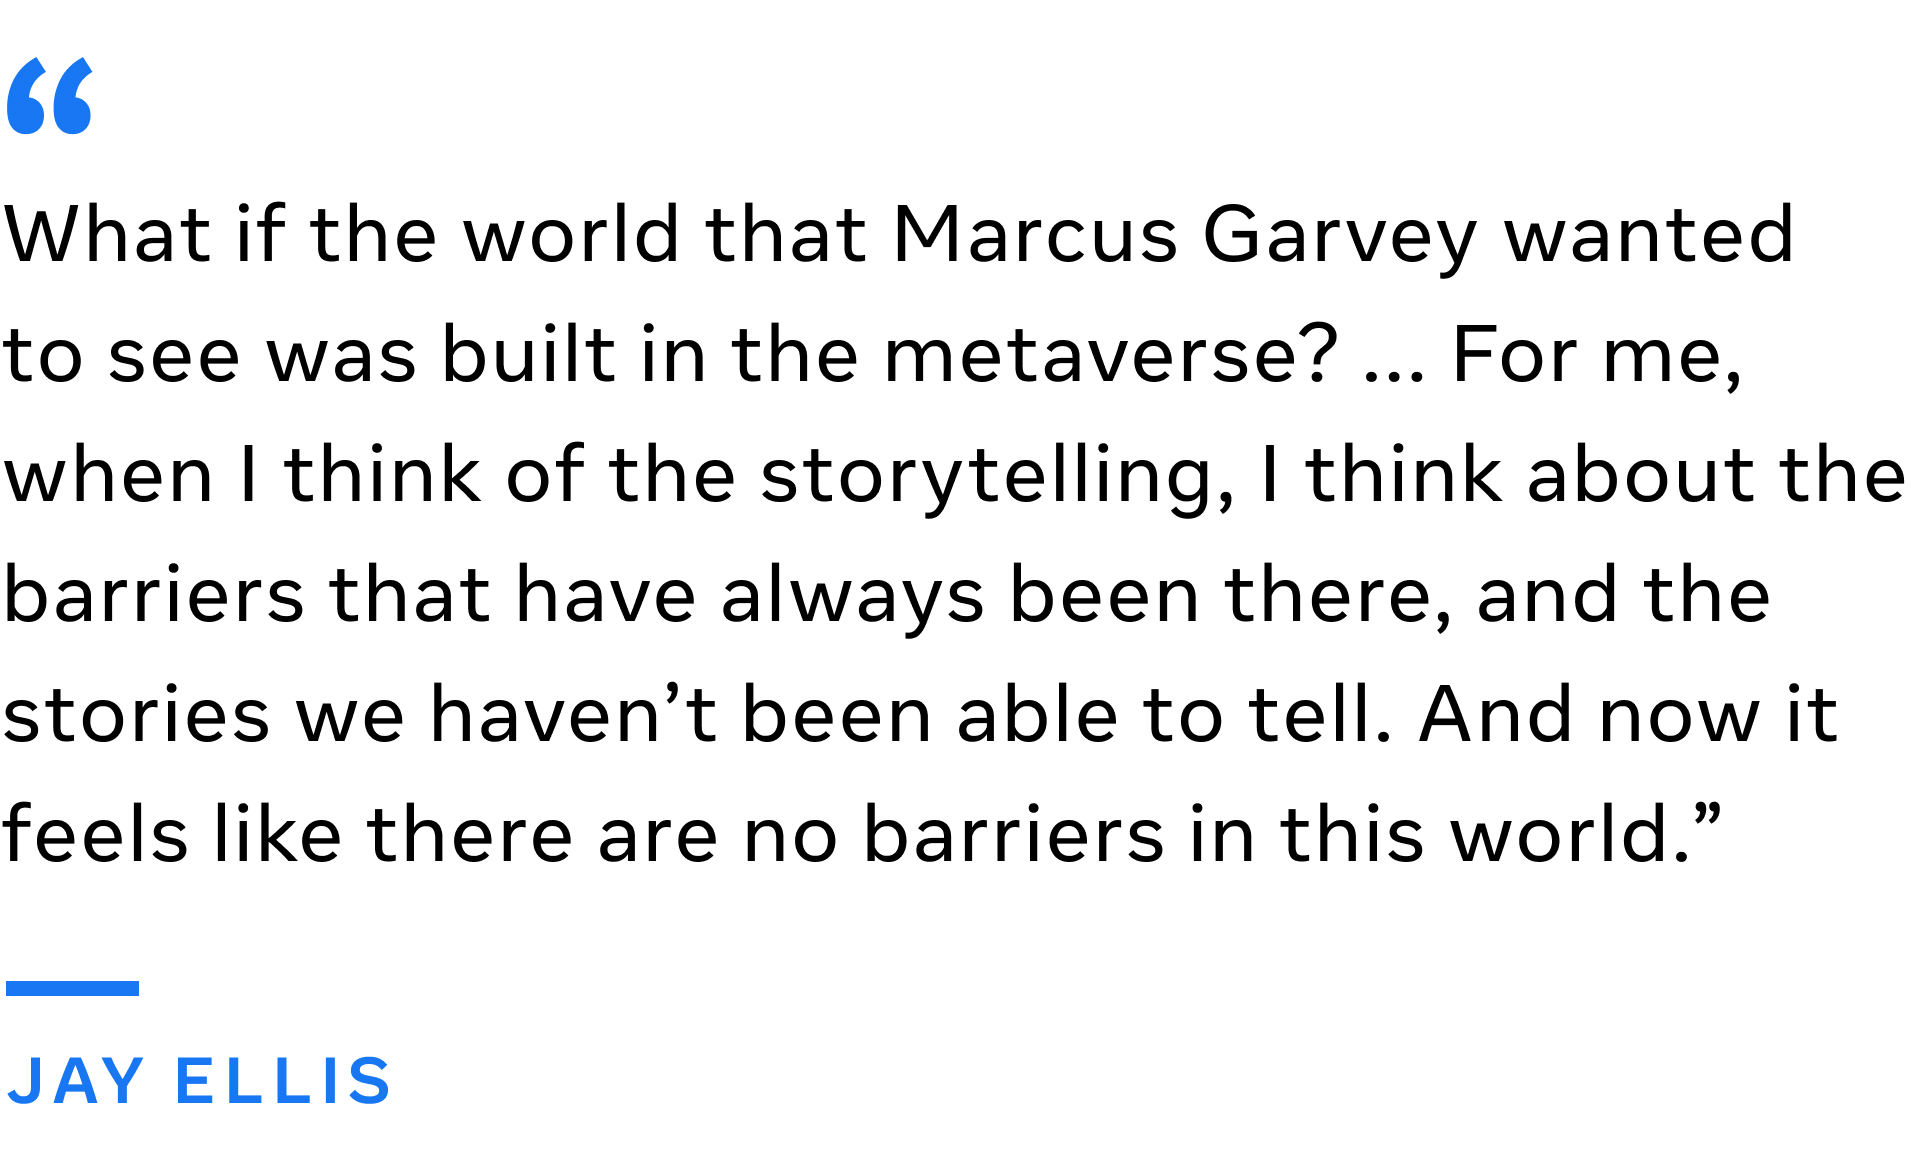 “What if the world that Marcus Garvey wanted to see was built in the metaverse? ... For me, when I think of the storytelling, I think about the barriers that have always been there, and the stories we haven’t been able to tell. And now it feels like there are no barriers in this world.” — Jay Ellis